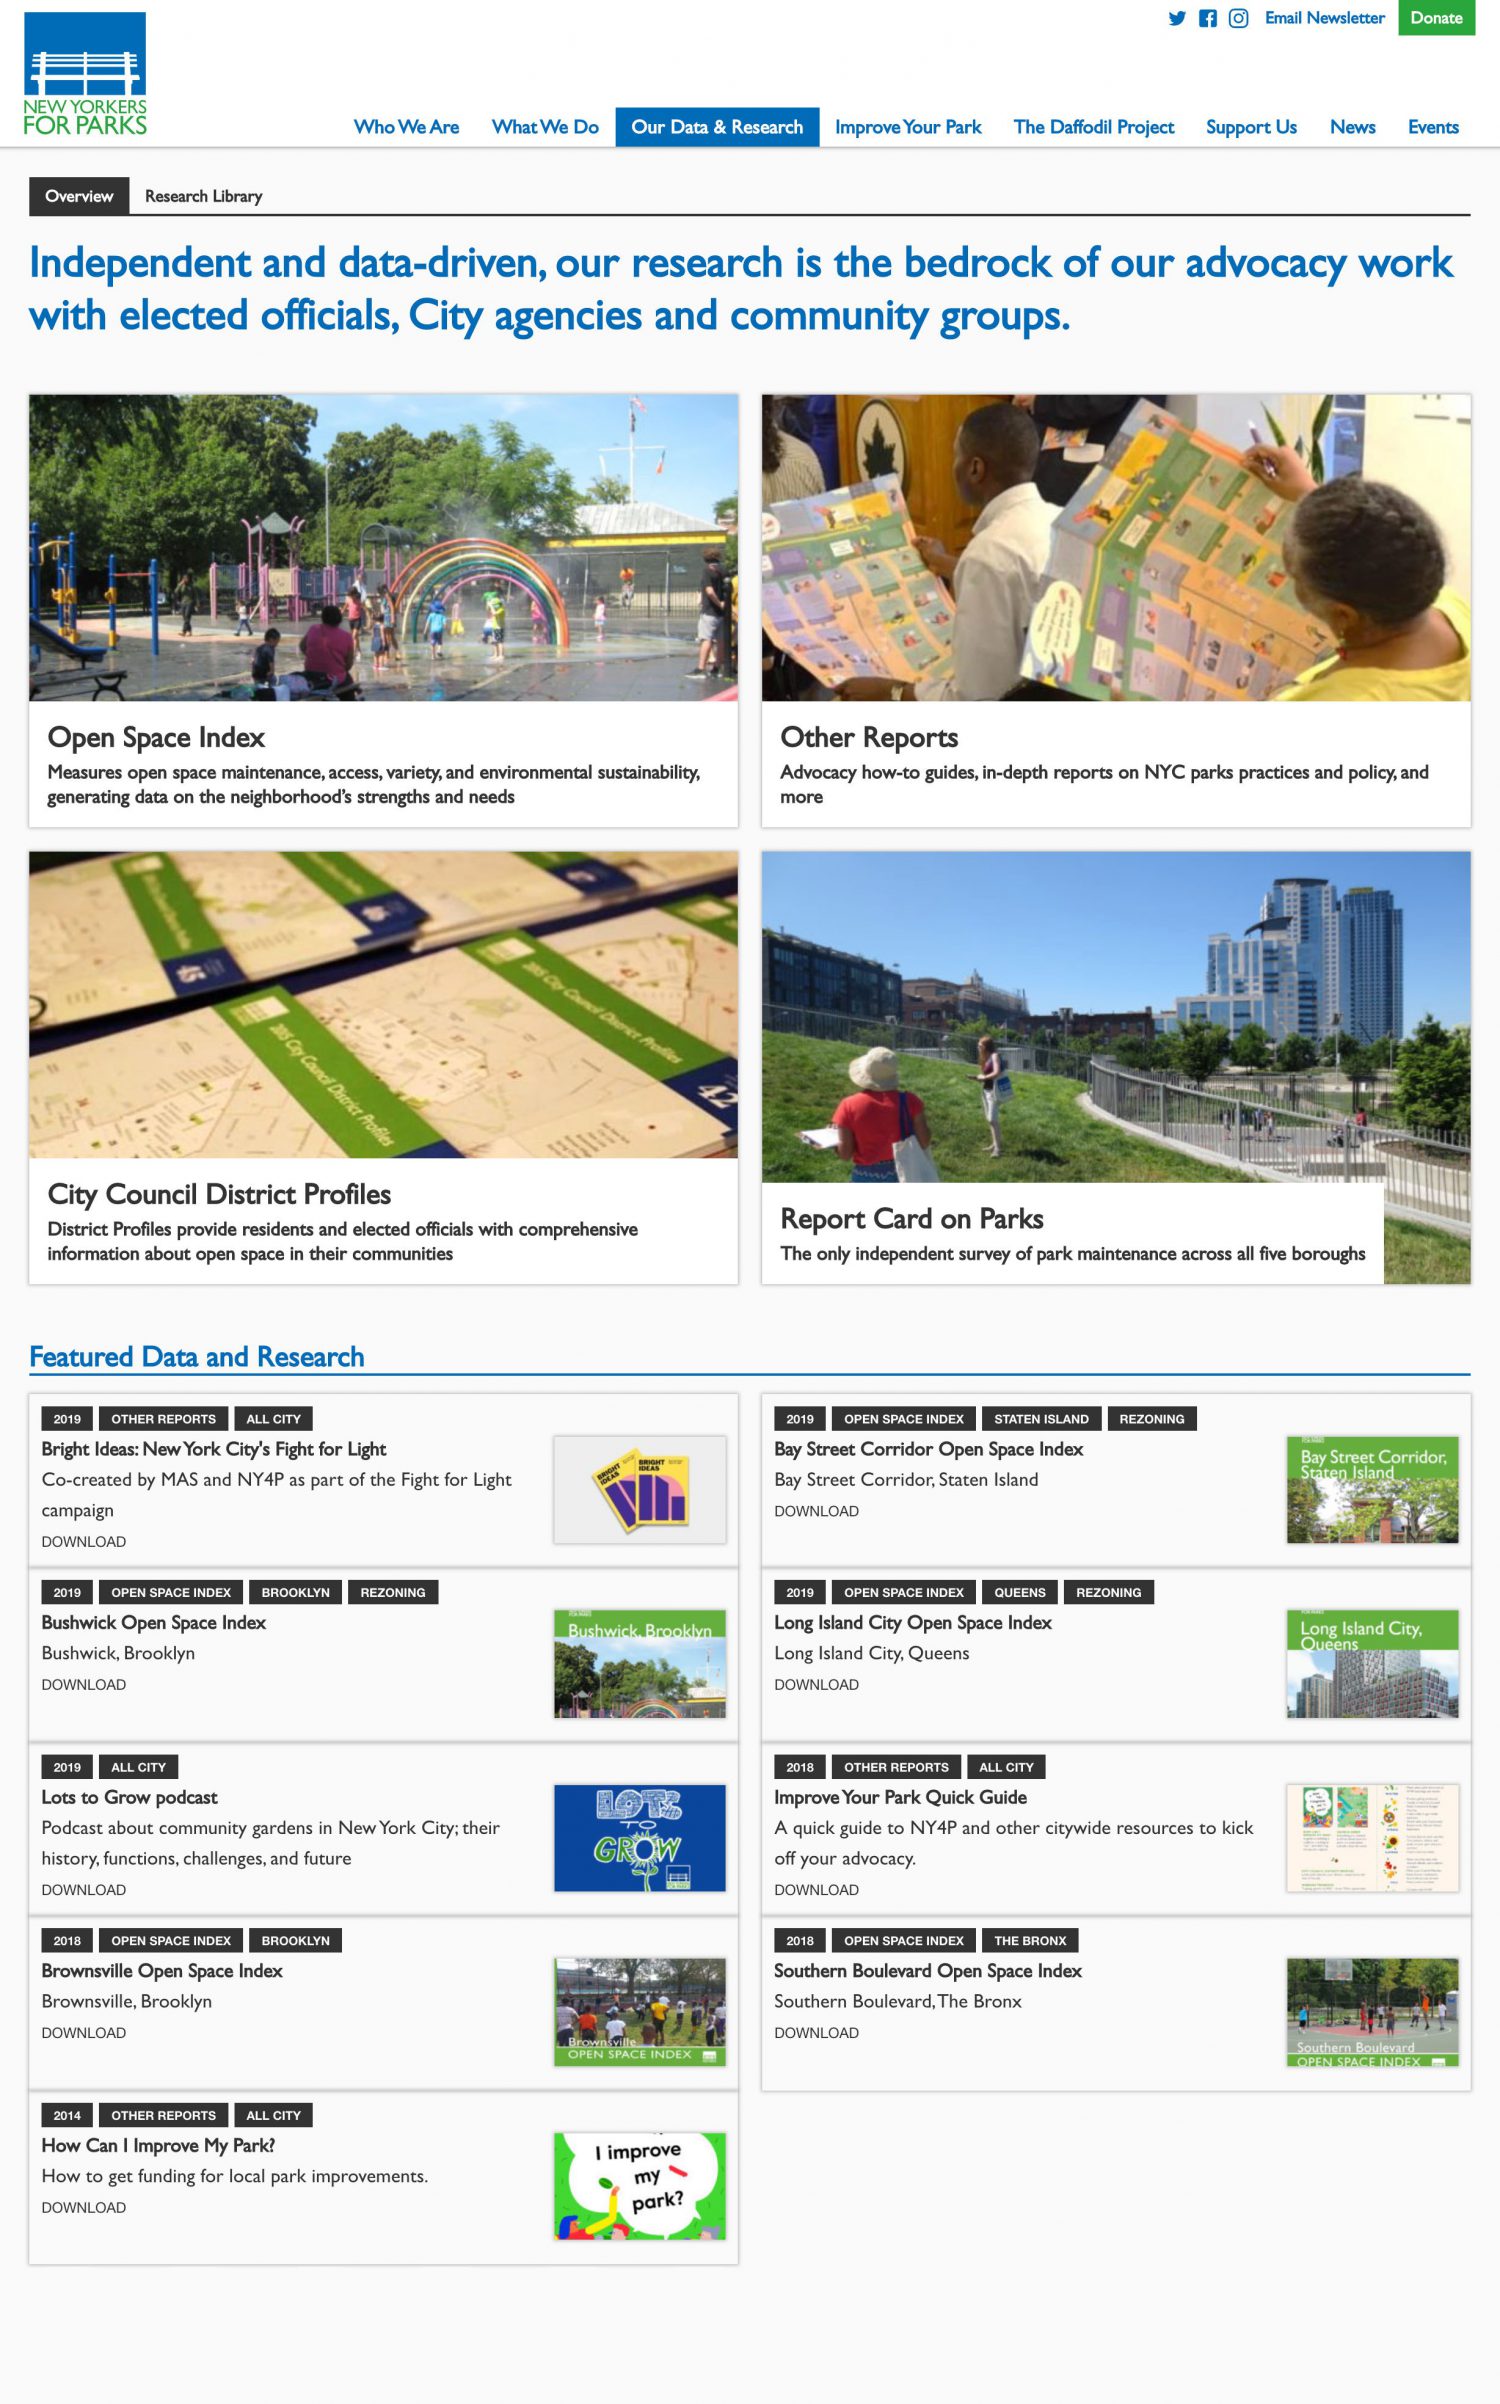 Screenshot of the New Yorkers for Parks website's Data and Research page